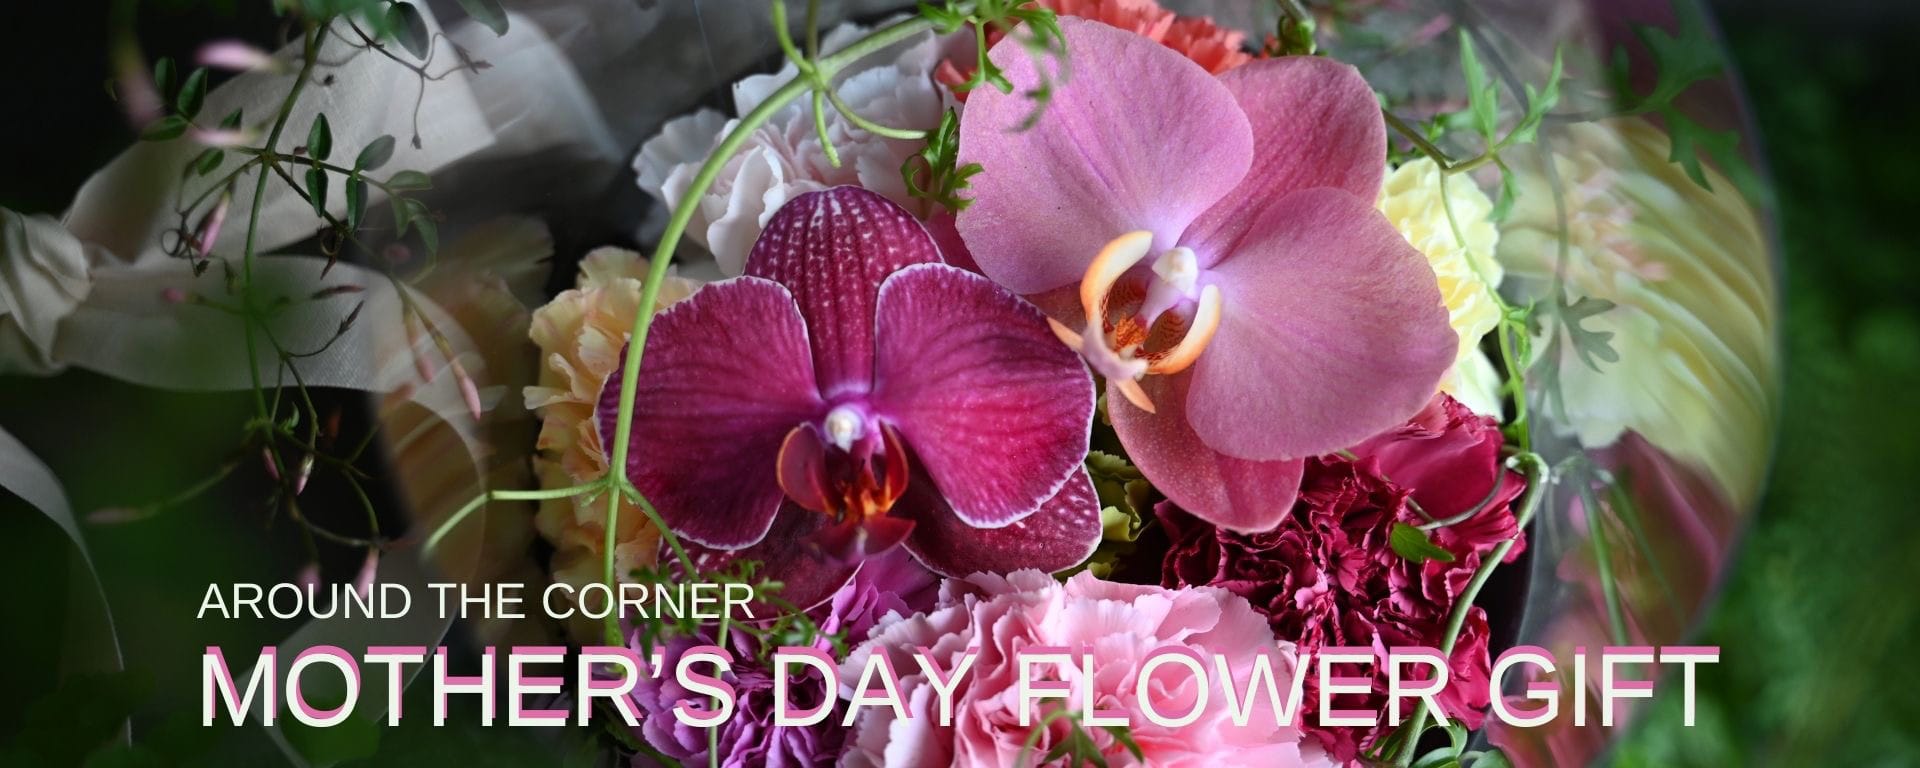 MOTHER'S DAY FLOWER GIFT